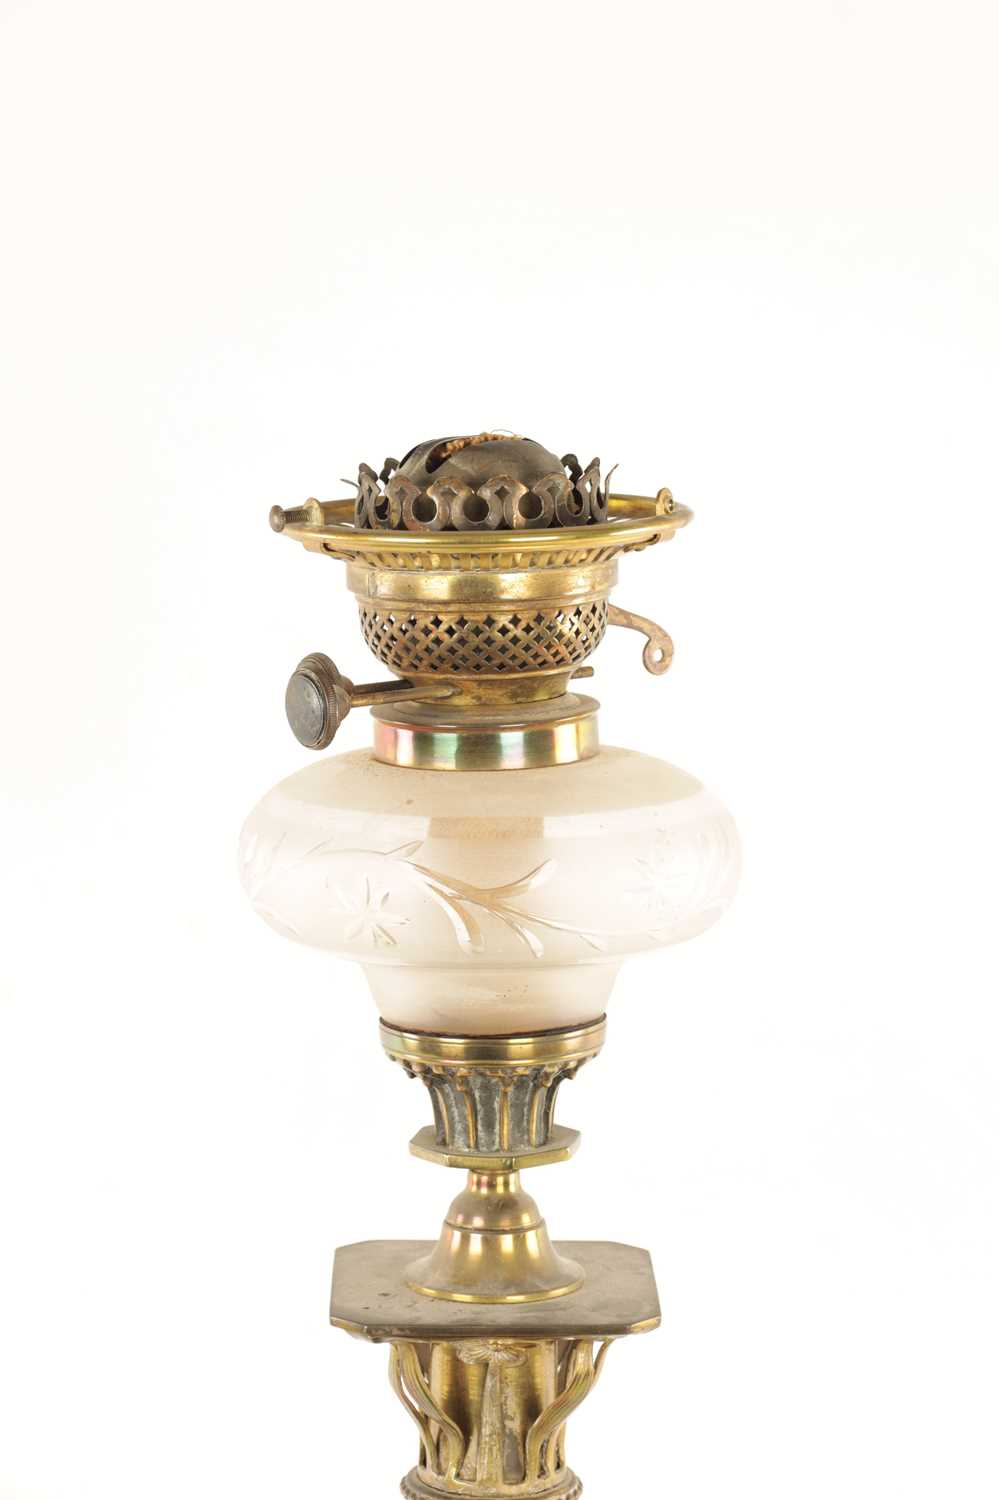 A LATE 19TH CENTURY FRENCH ORMOLU MOUNTED VERDE GREEN MARBLE OIL LAMP - Image 4 of 8